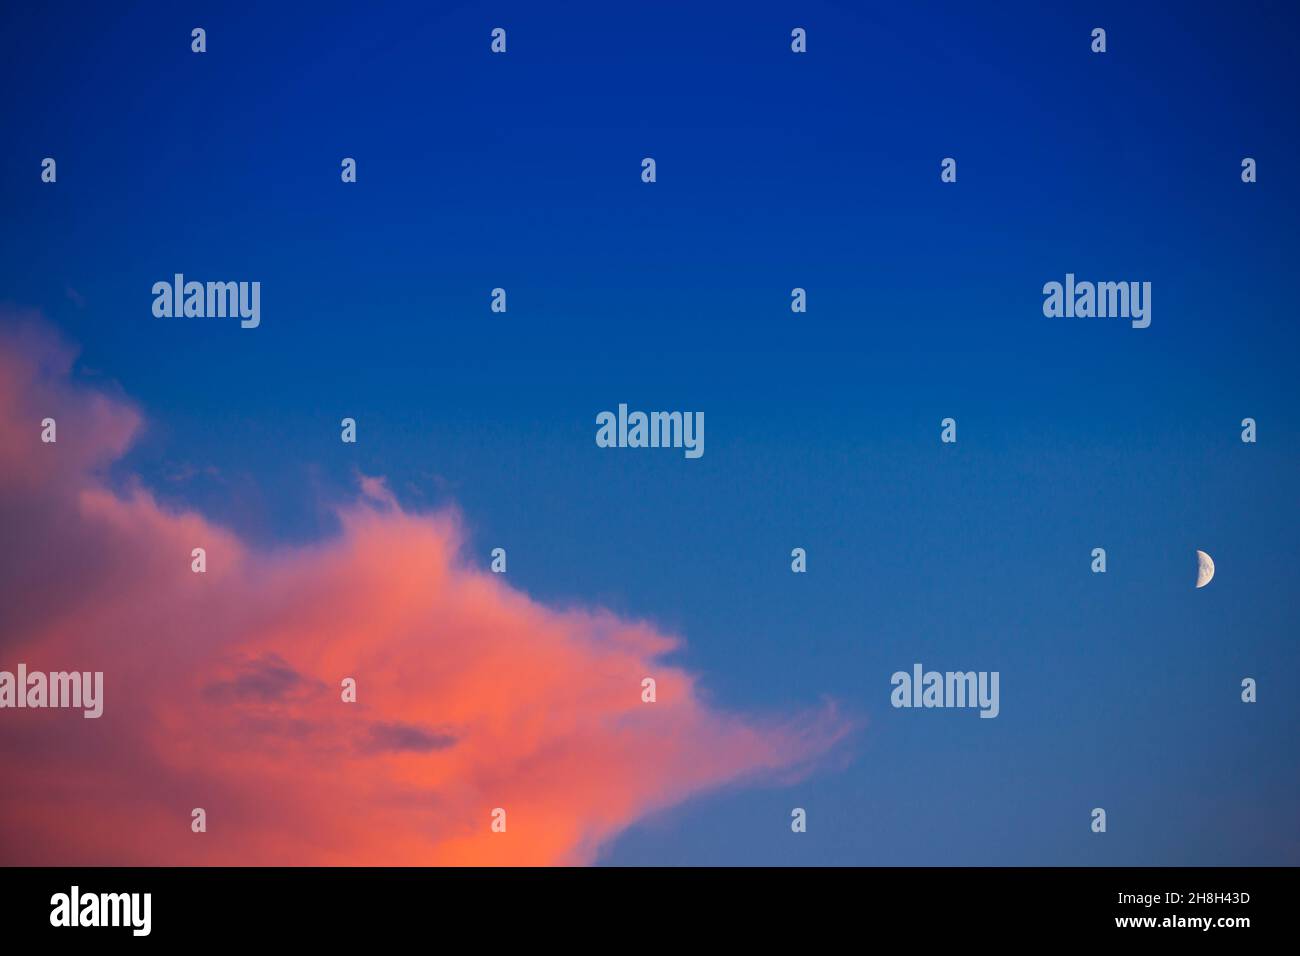 Colorful orange cloud against blue sky with a half moon at sunset, lots of copy space. Stock Photo